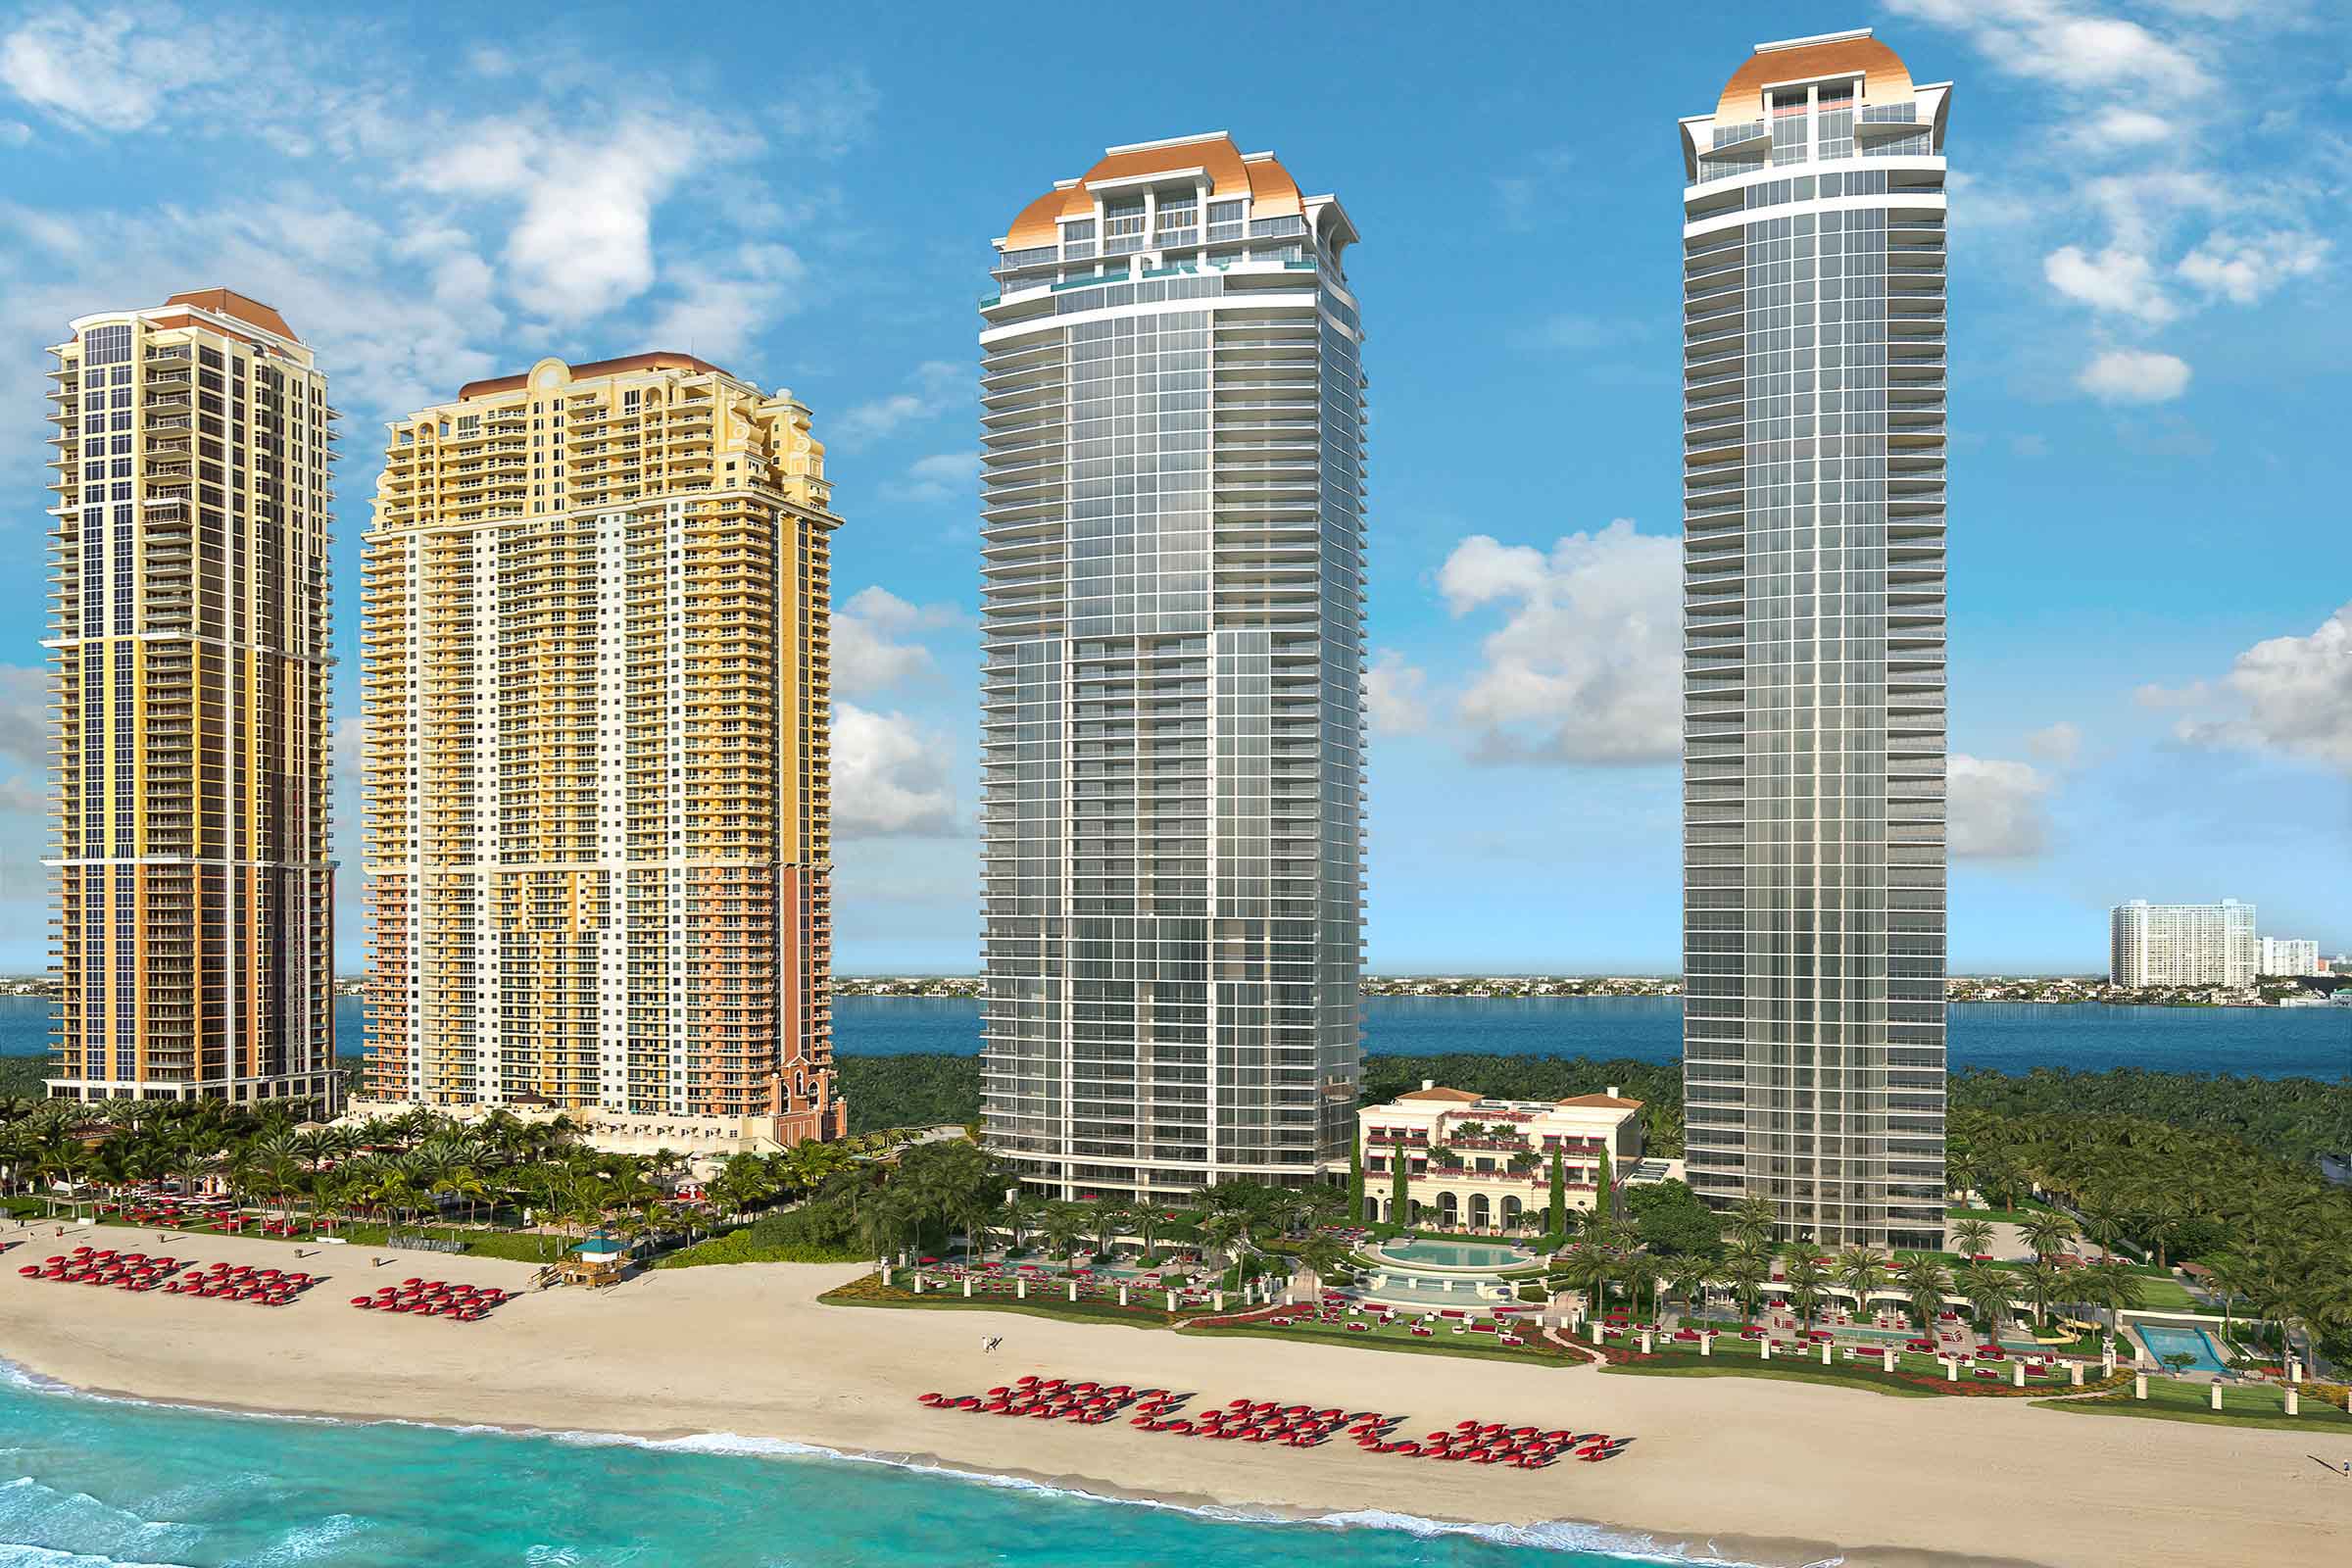 Rendering of The Estates at Acqualina